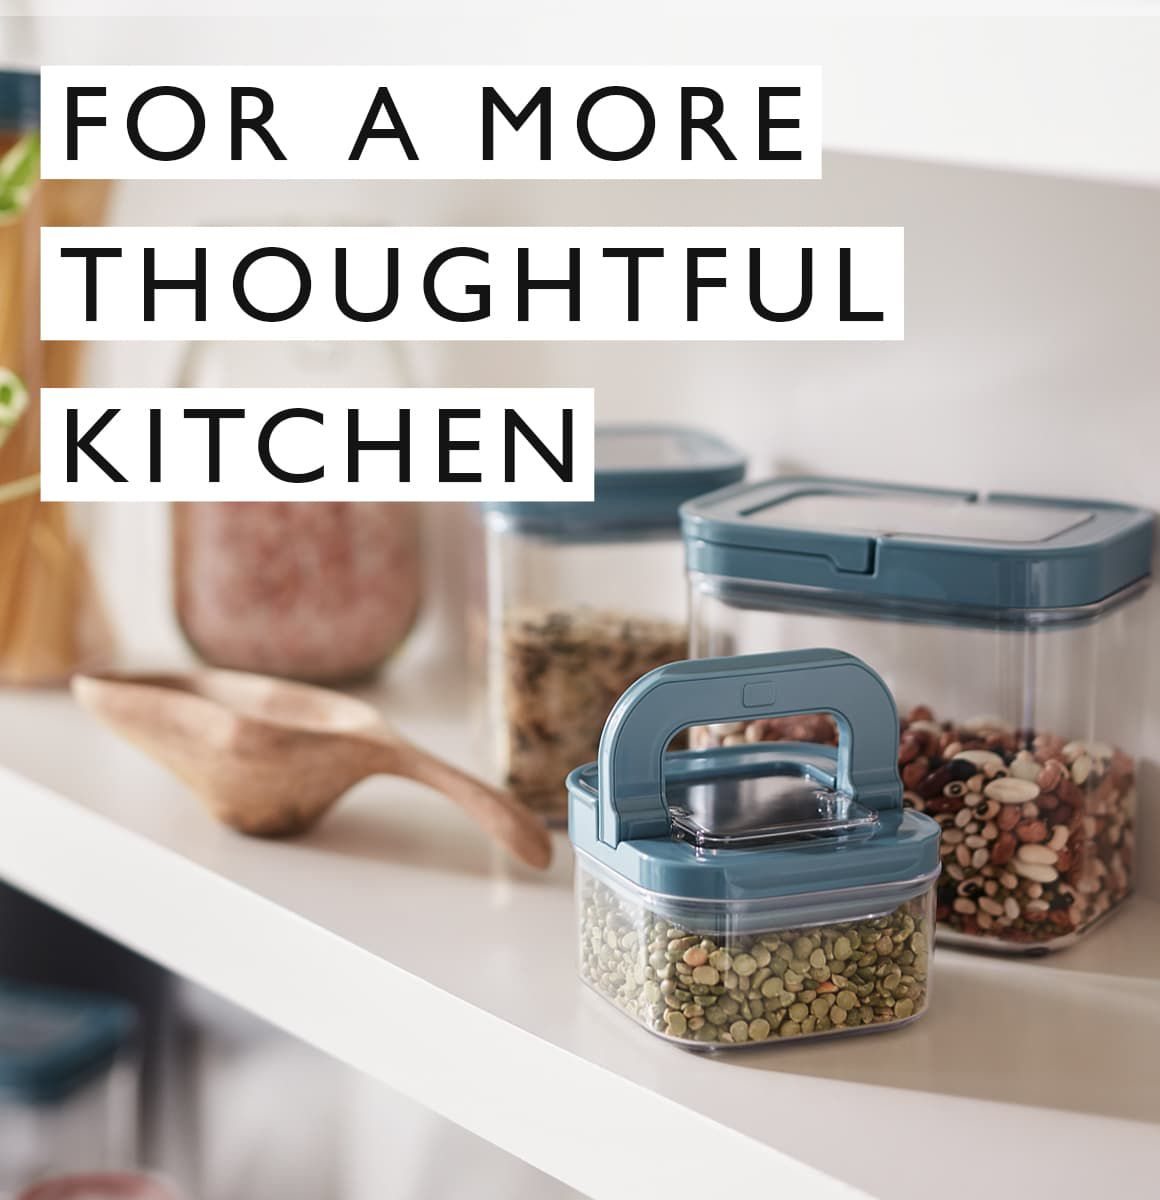 For a more thoughtful kitchen